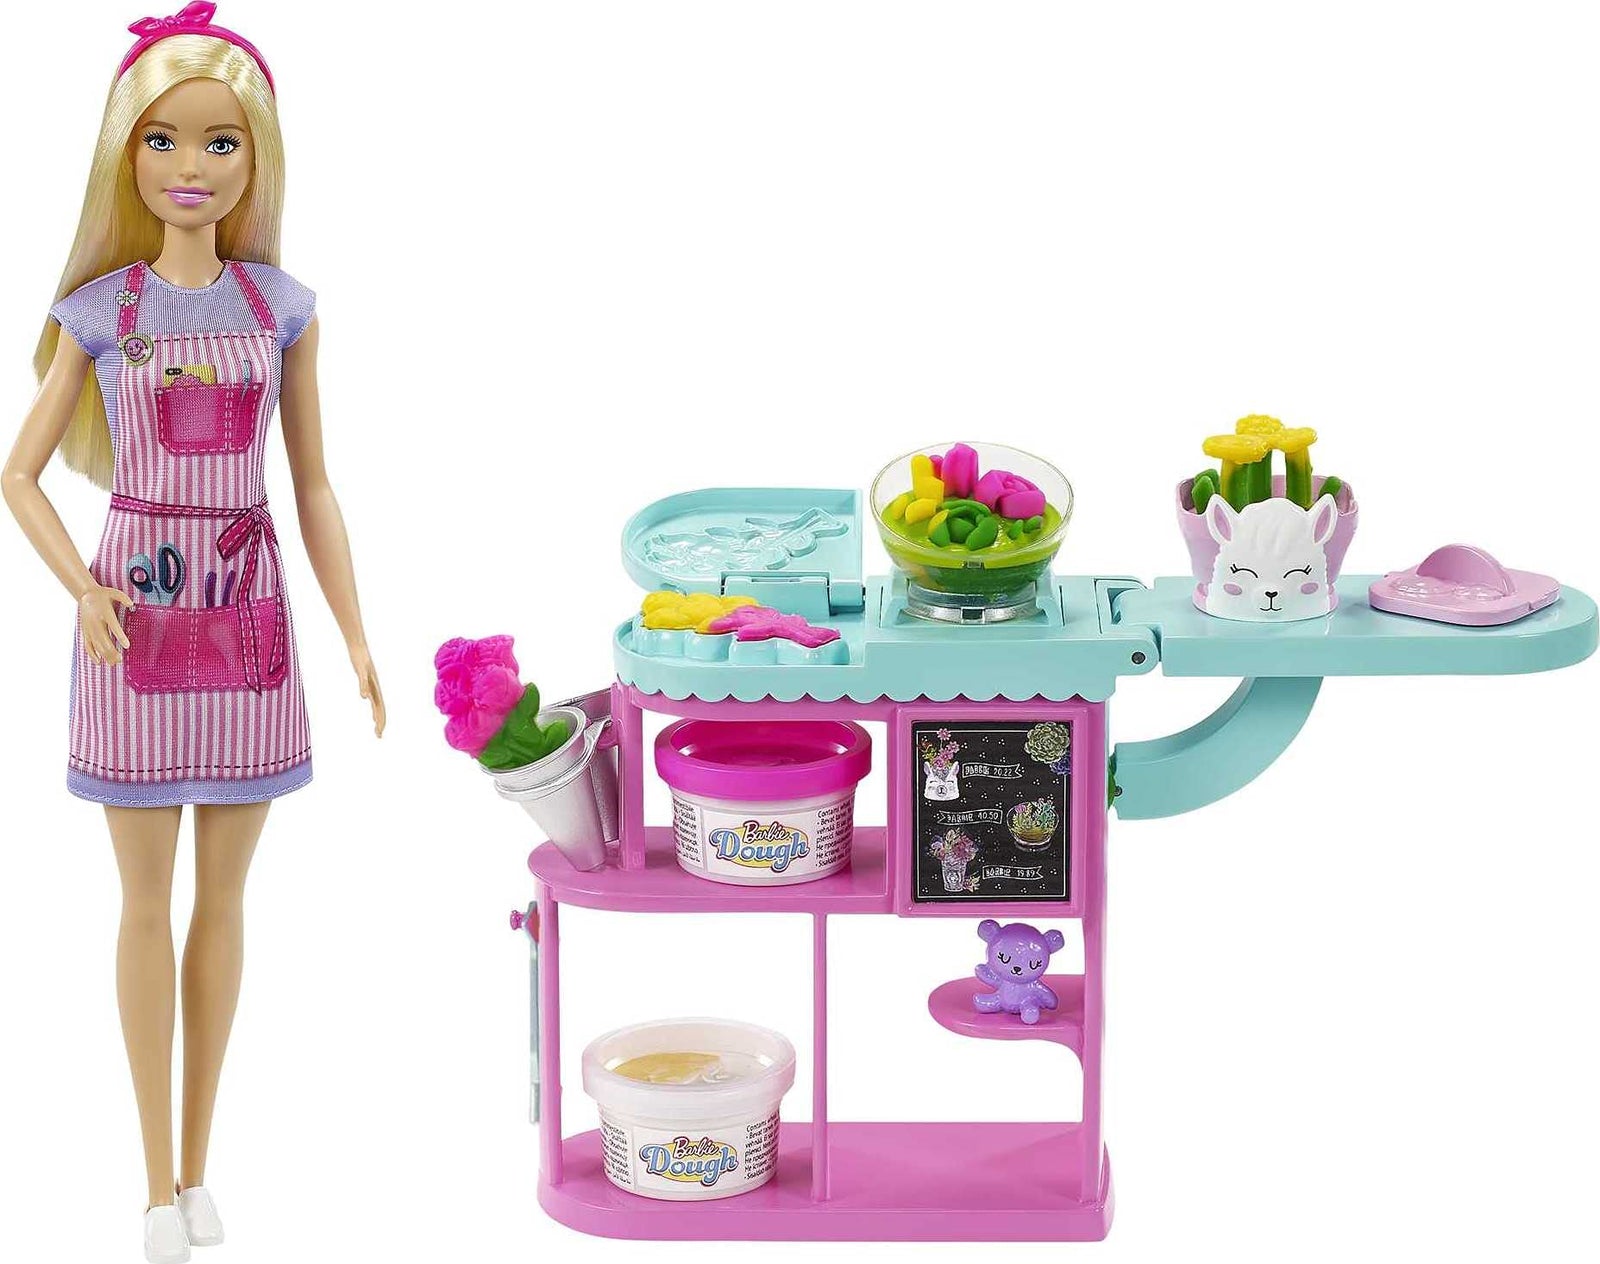 Barbie Florist Playset with 12-in Blonde Doll, Flower-Making Station, 3 Dough Colors, Mold, 2 Vases & Teddy Bear, Great Gift for Ages 3 Years Old & Up